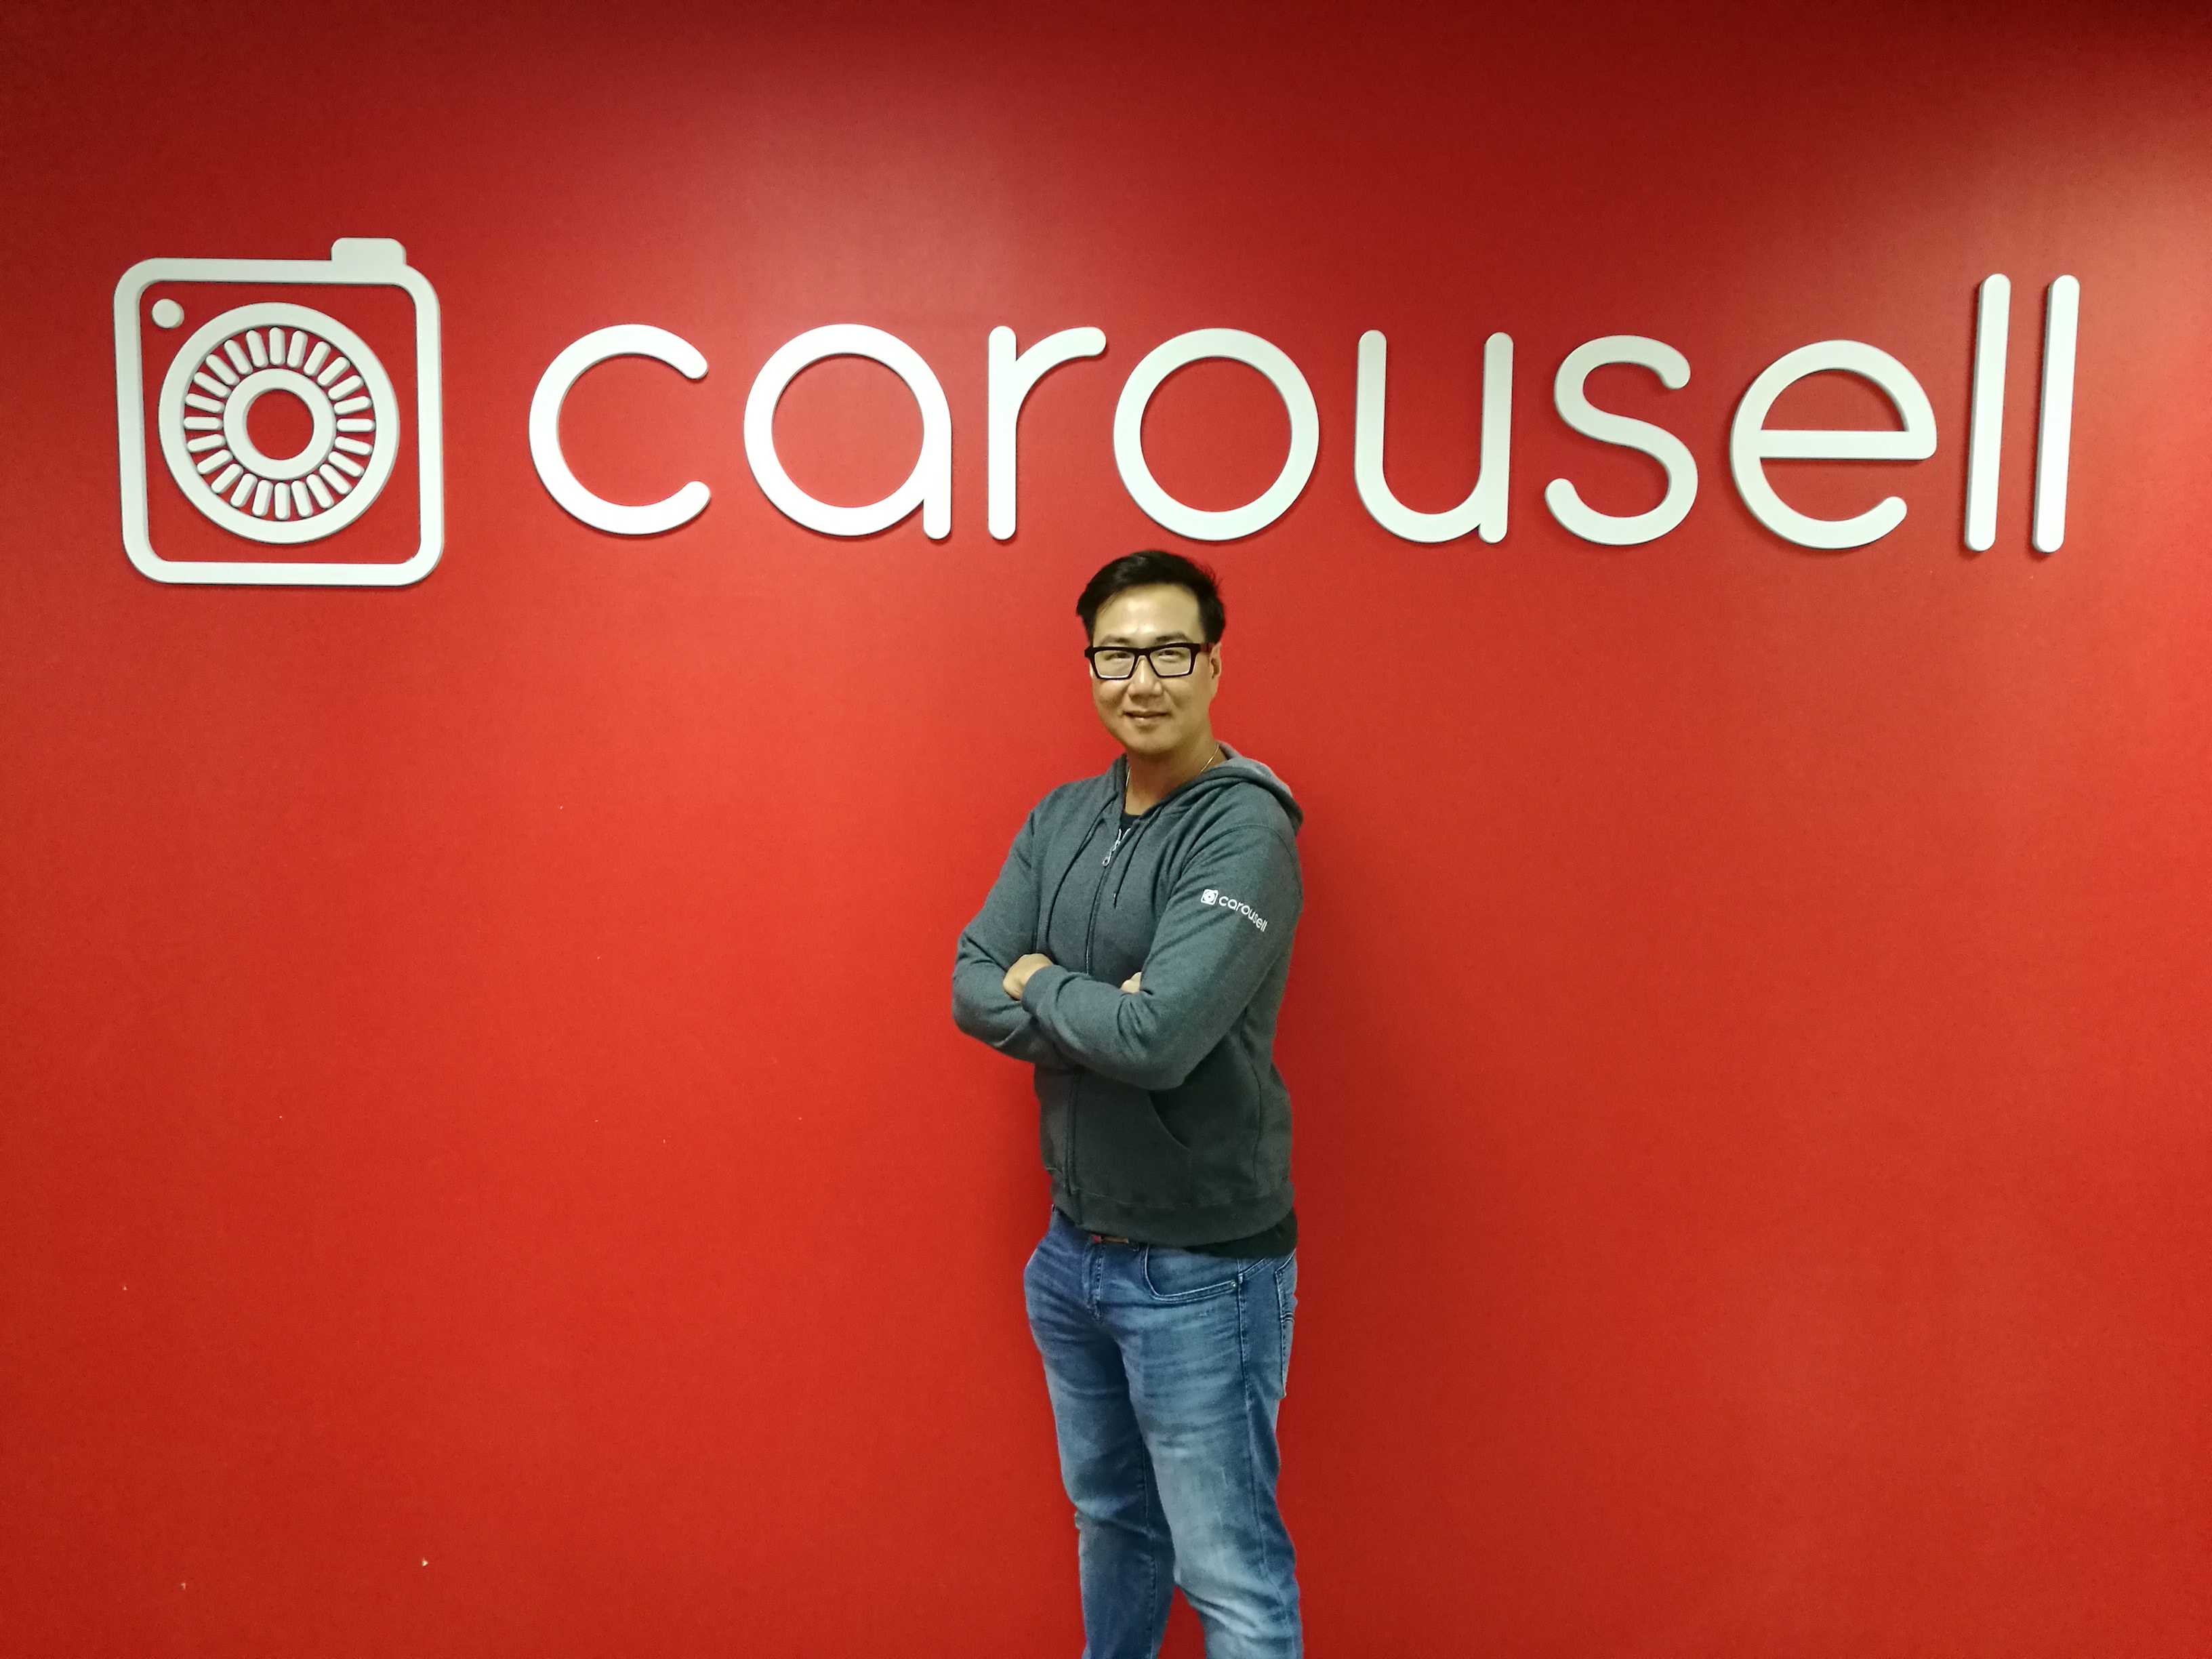 Carousell hires ex Property Guru chief business officer Lewis Ng to lead commercial operations